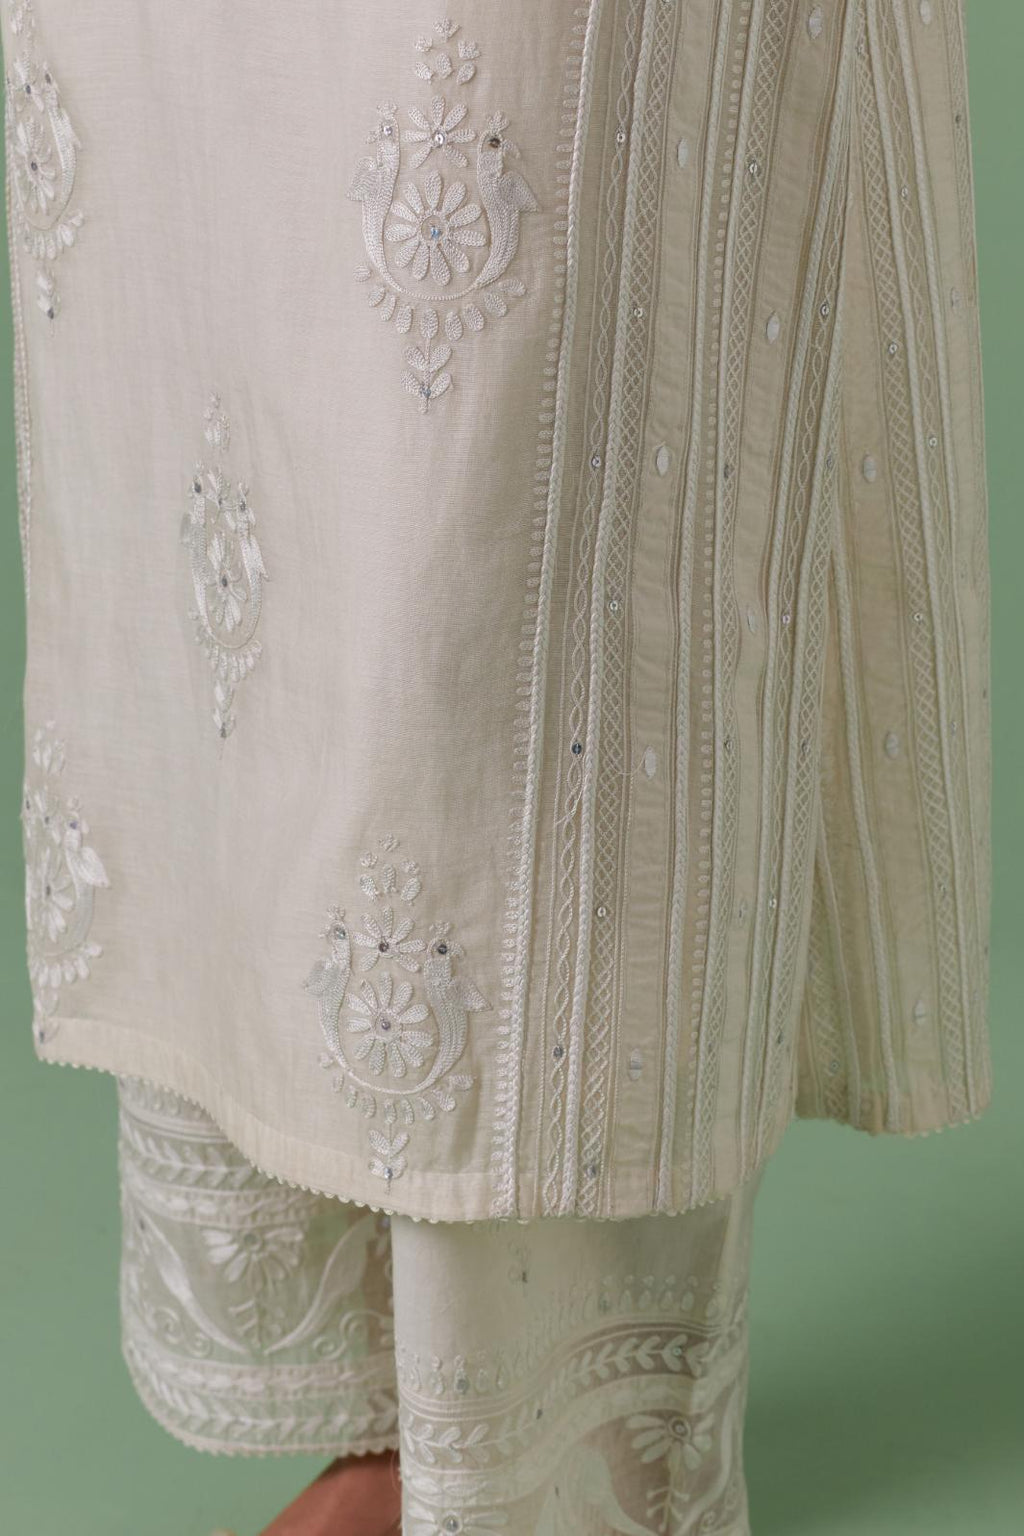 Off-white cotton chanderi straight kurta set with yoke and side panels. It has allover patchwork and silk thread embroidery, highlighted with mirror, sequins, tassels and braids.